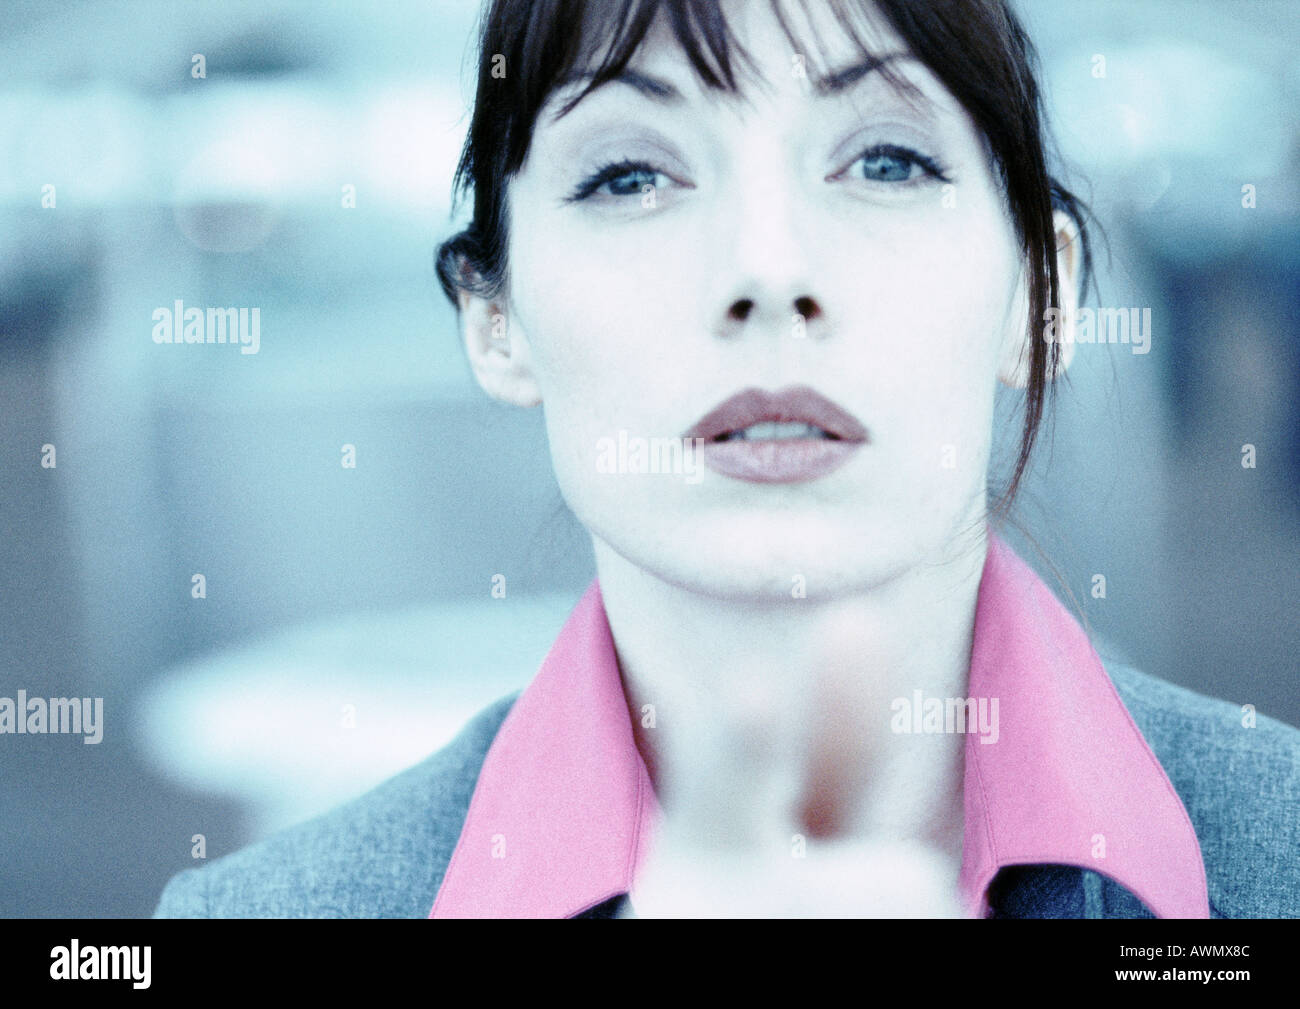 Businesswoman looking and pointing at camera, fingers blurred in foreground, close-up, cool toned. Stock Photo